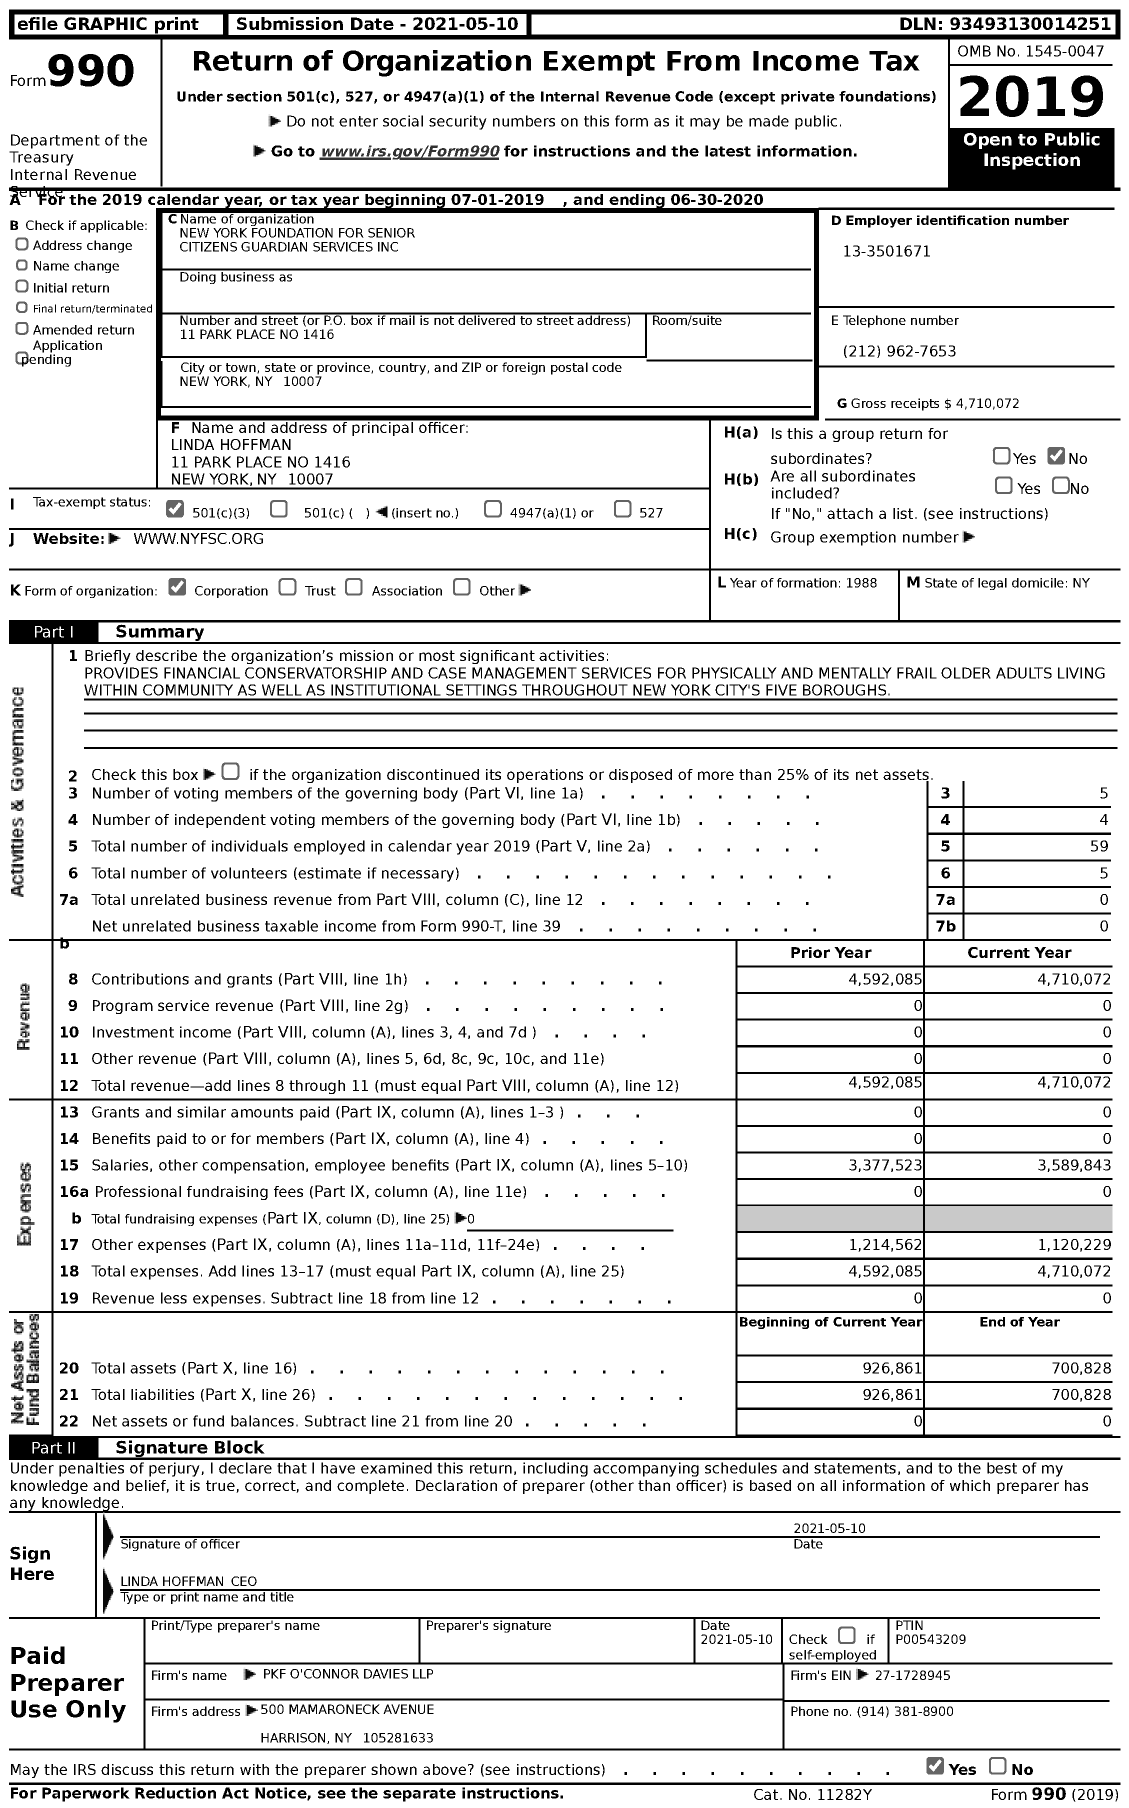 Image of first page of 2019 Form 990 for New York Foundation for Senior Citizens Guardian Services (NYFSC)